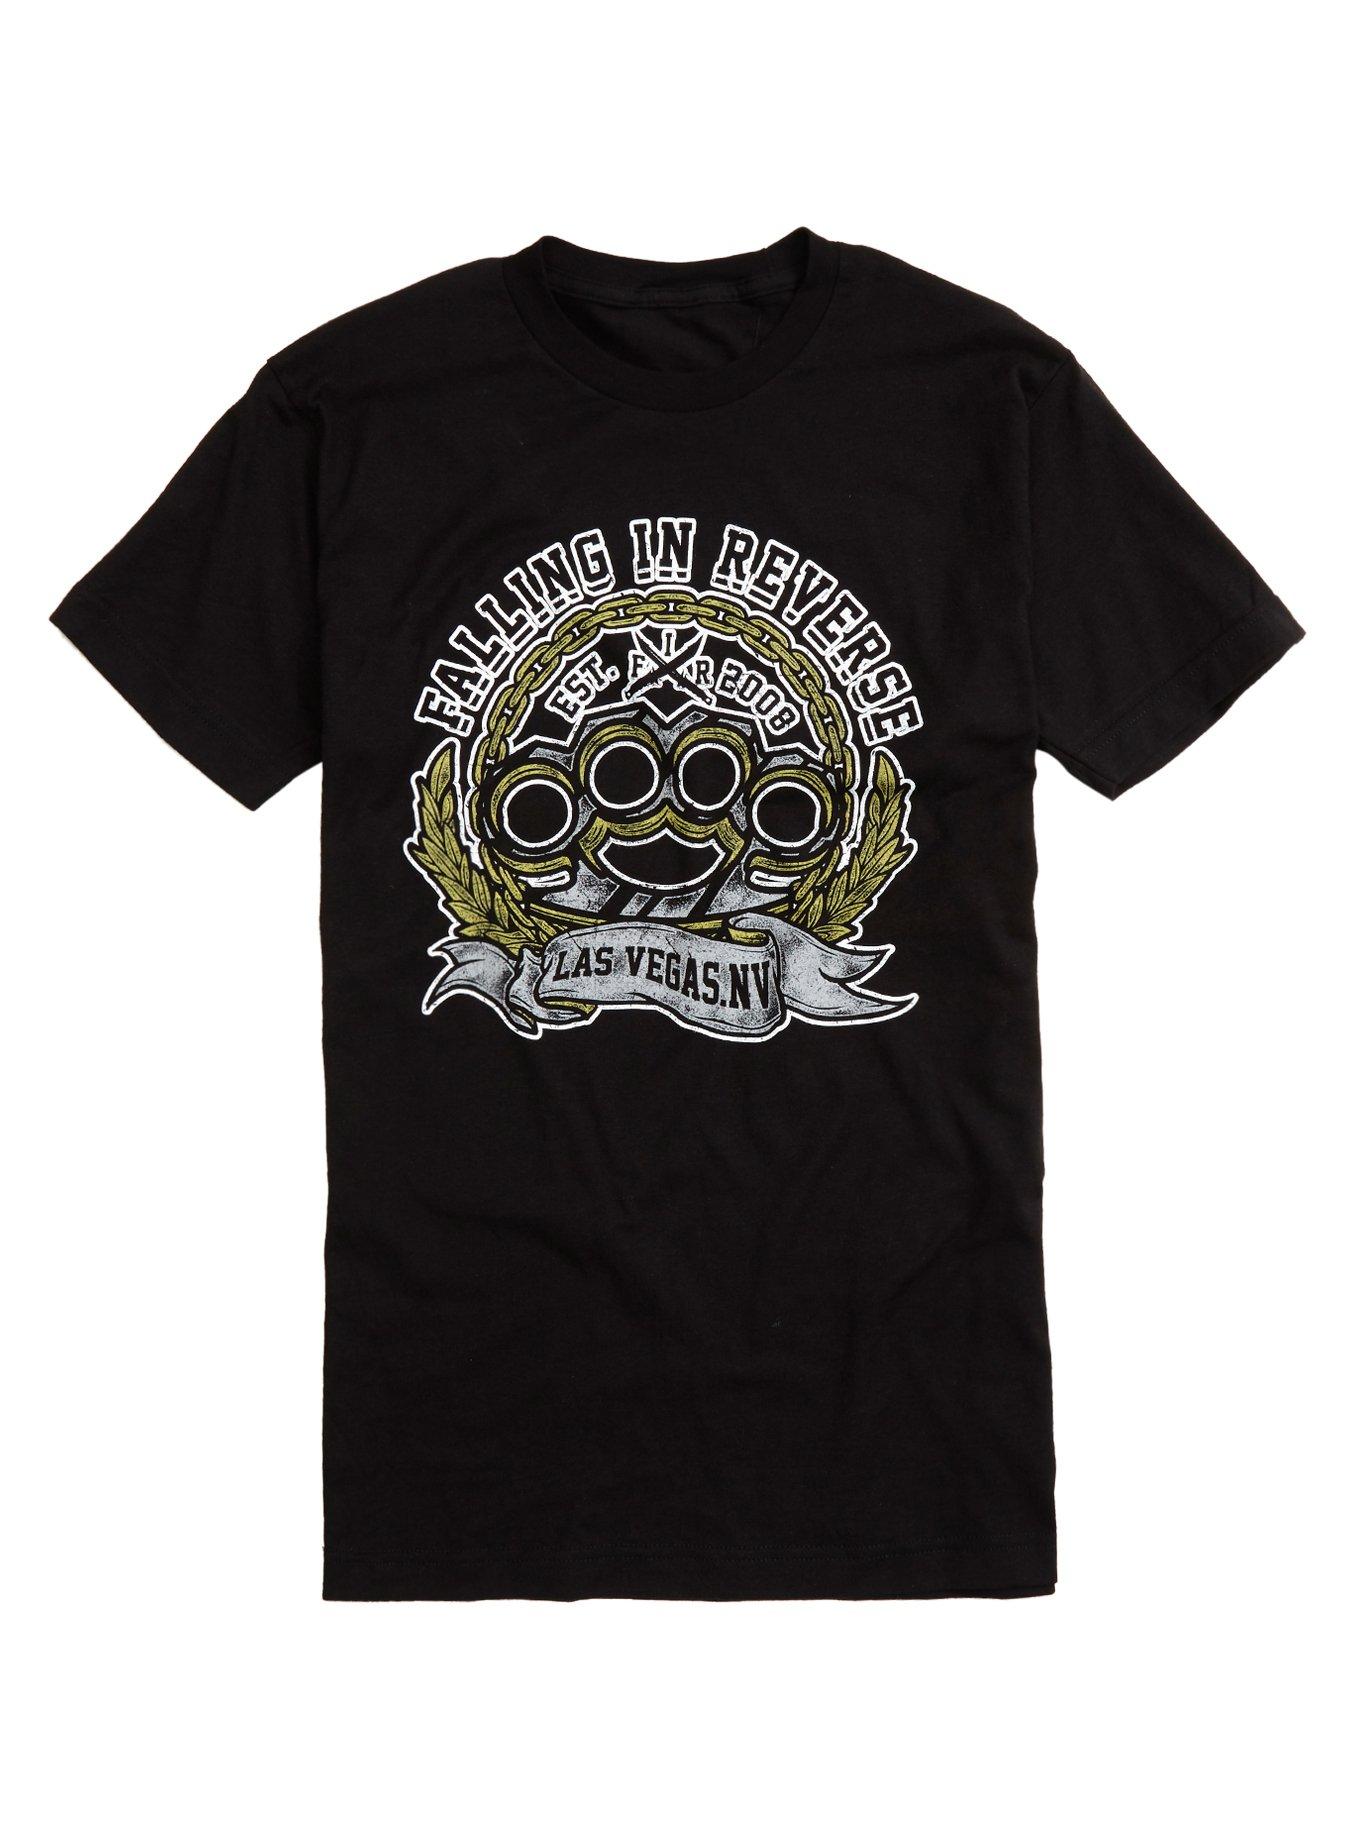 Falling In Reverse Brass Knuckles T-Shirt | Hot Topic